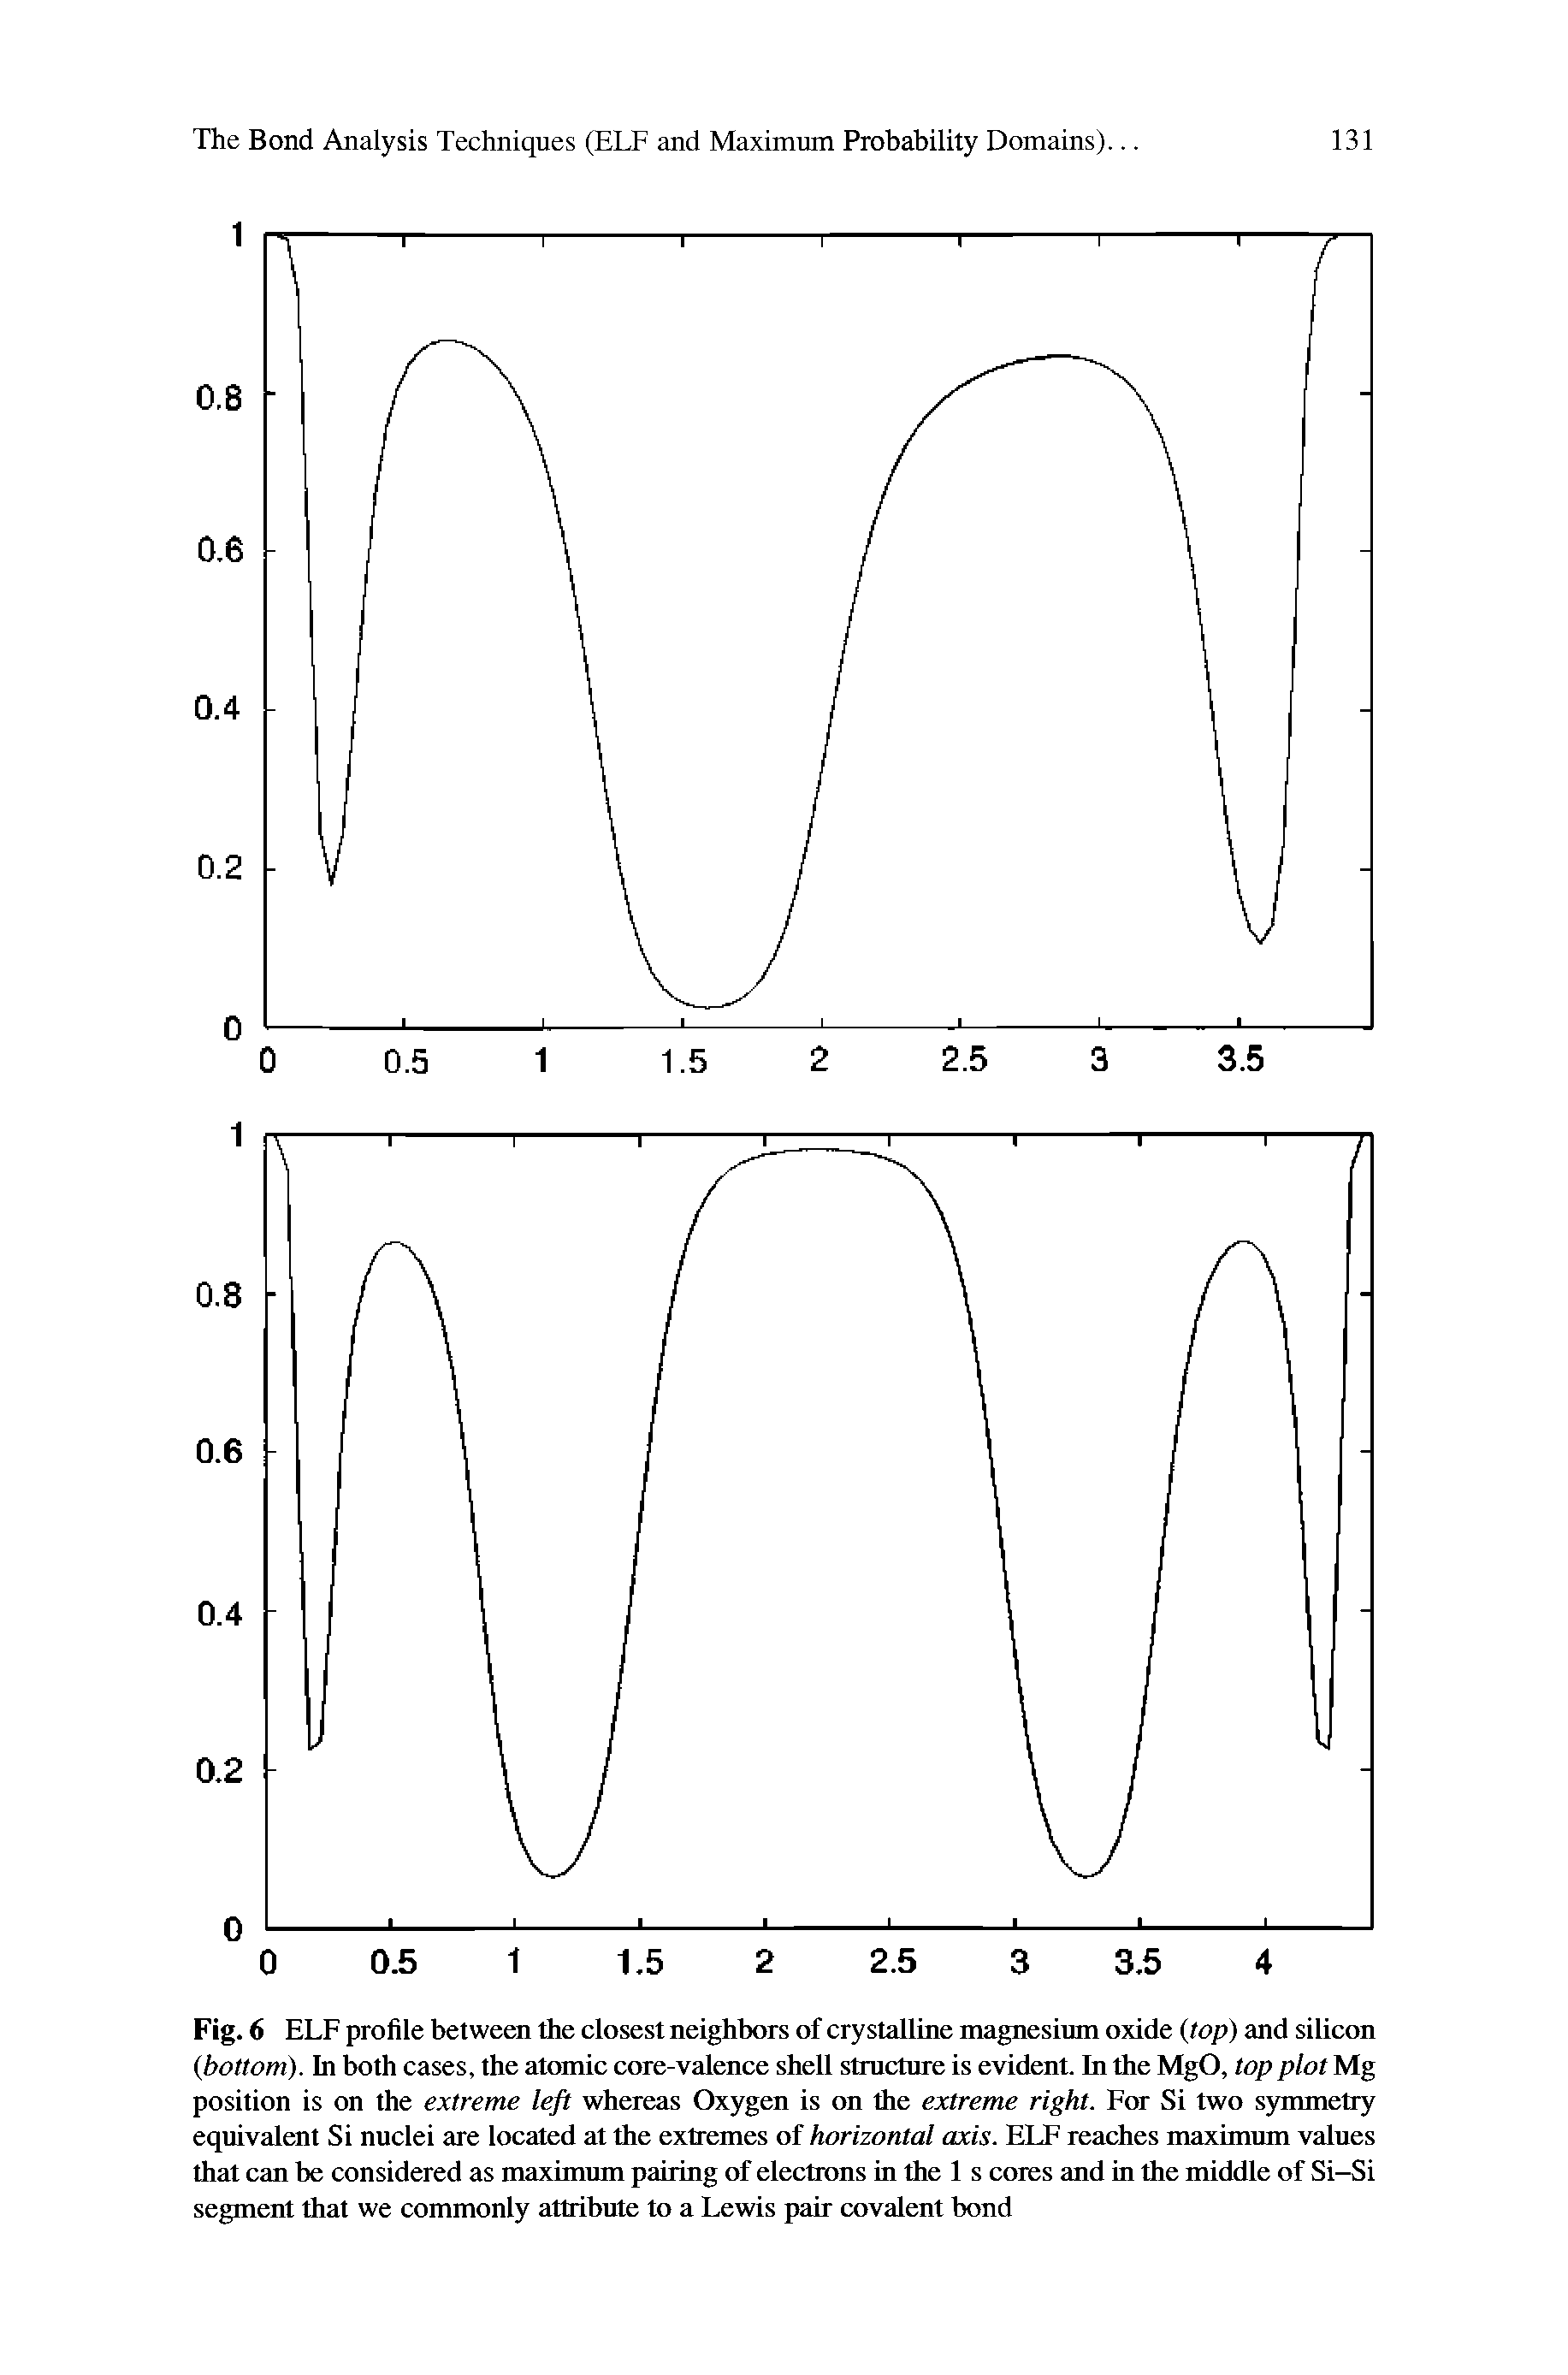 Fig. 6 ELF profile between the closest neighbors of crystalline magnesium oxide (top) and silicon (bottom). In both cases, the afannic core-valence shell structure is evident. In the MgO, top plot Mg position is on the extreme whereas Oxygen is on the extreme right. For Si two symmetry equivalent Si nuclei are located at the extremes of horizontal axis. ELF reaches maximum values that can be considered as maximum pairing of electrons in the 1 s cores and in the middle of Si-Si segment that we commonly attribute to a Lewis pair covalent bond...